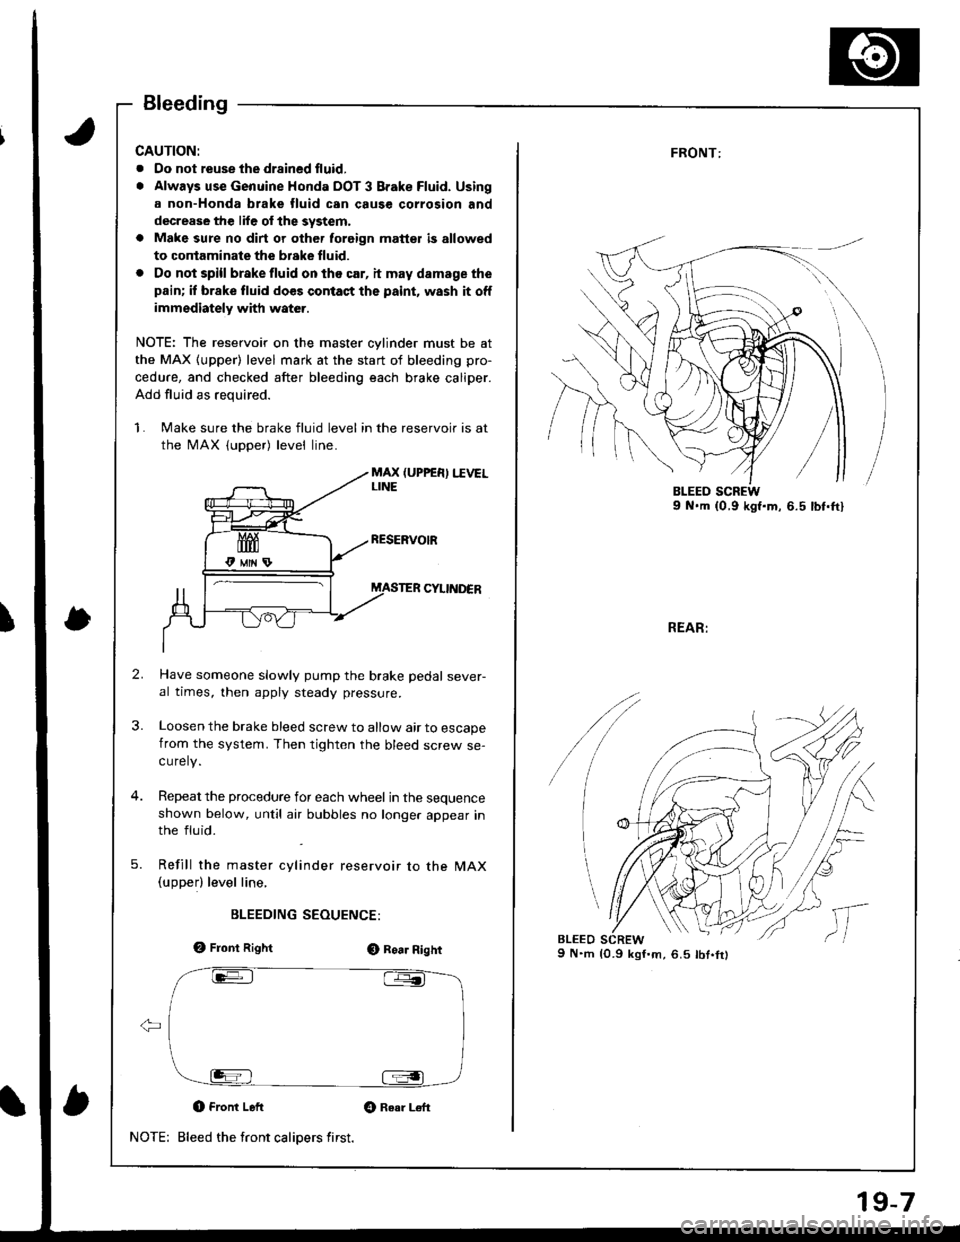 HONDA INTEGRA 1998 4.G Workshop Manual Bleeding
CAUTION:
. Oo not reuse the drsined fluid,
. Always use Genuine Honda DOT 3 Brake Fluid. Using
a non-Honda brake fluid can cause corrosion and
decrease the lile of the system,
a Make sure no 